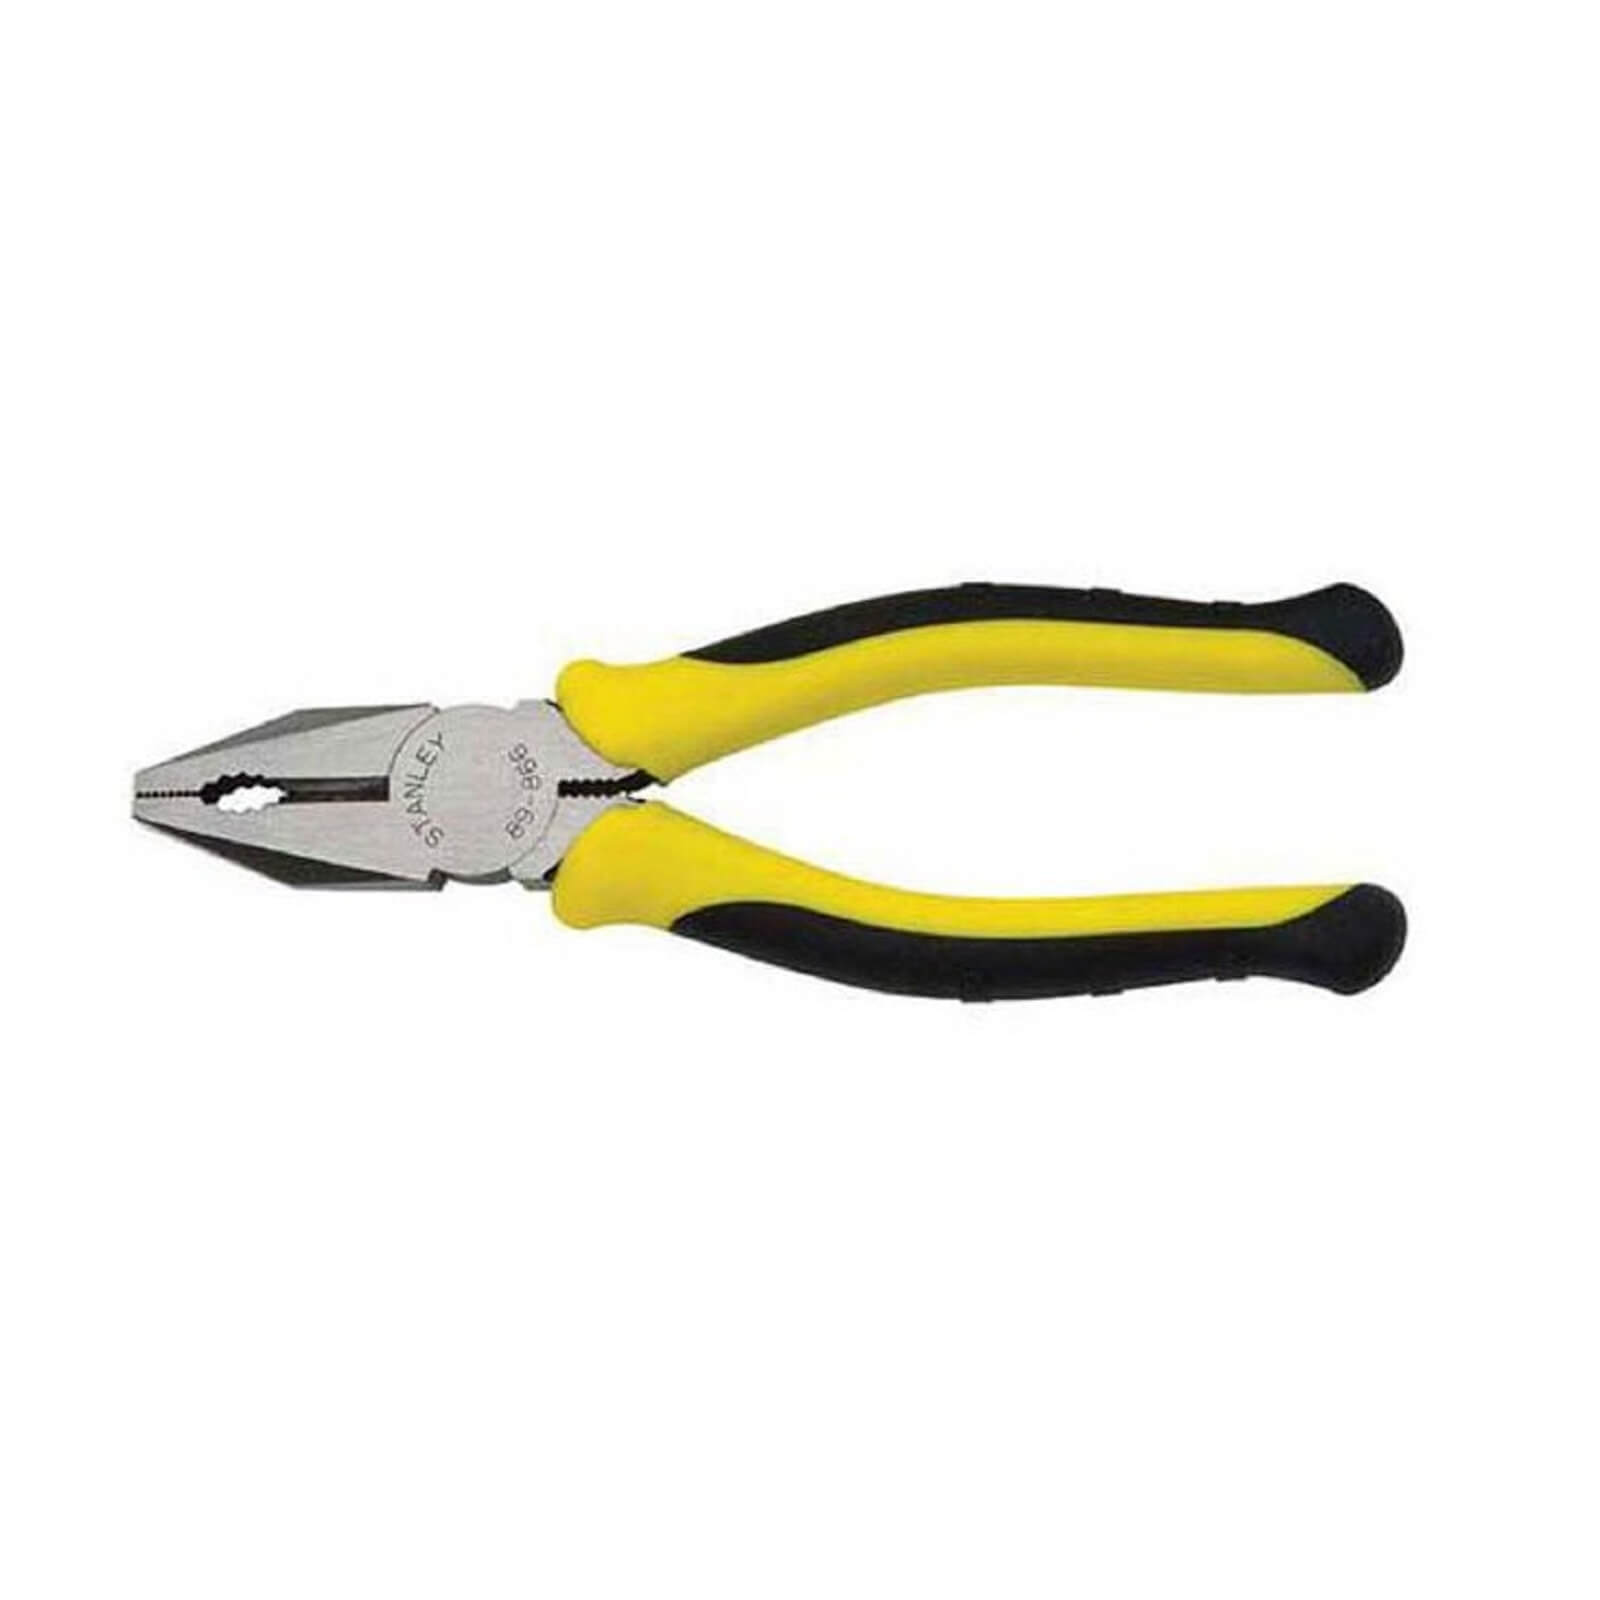 Stanley DynaGrip Combination Pliers - 150mm